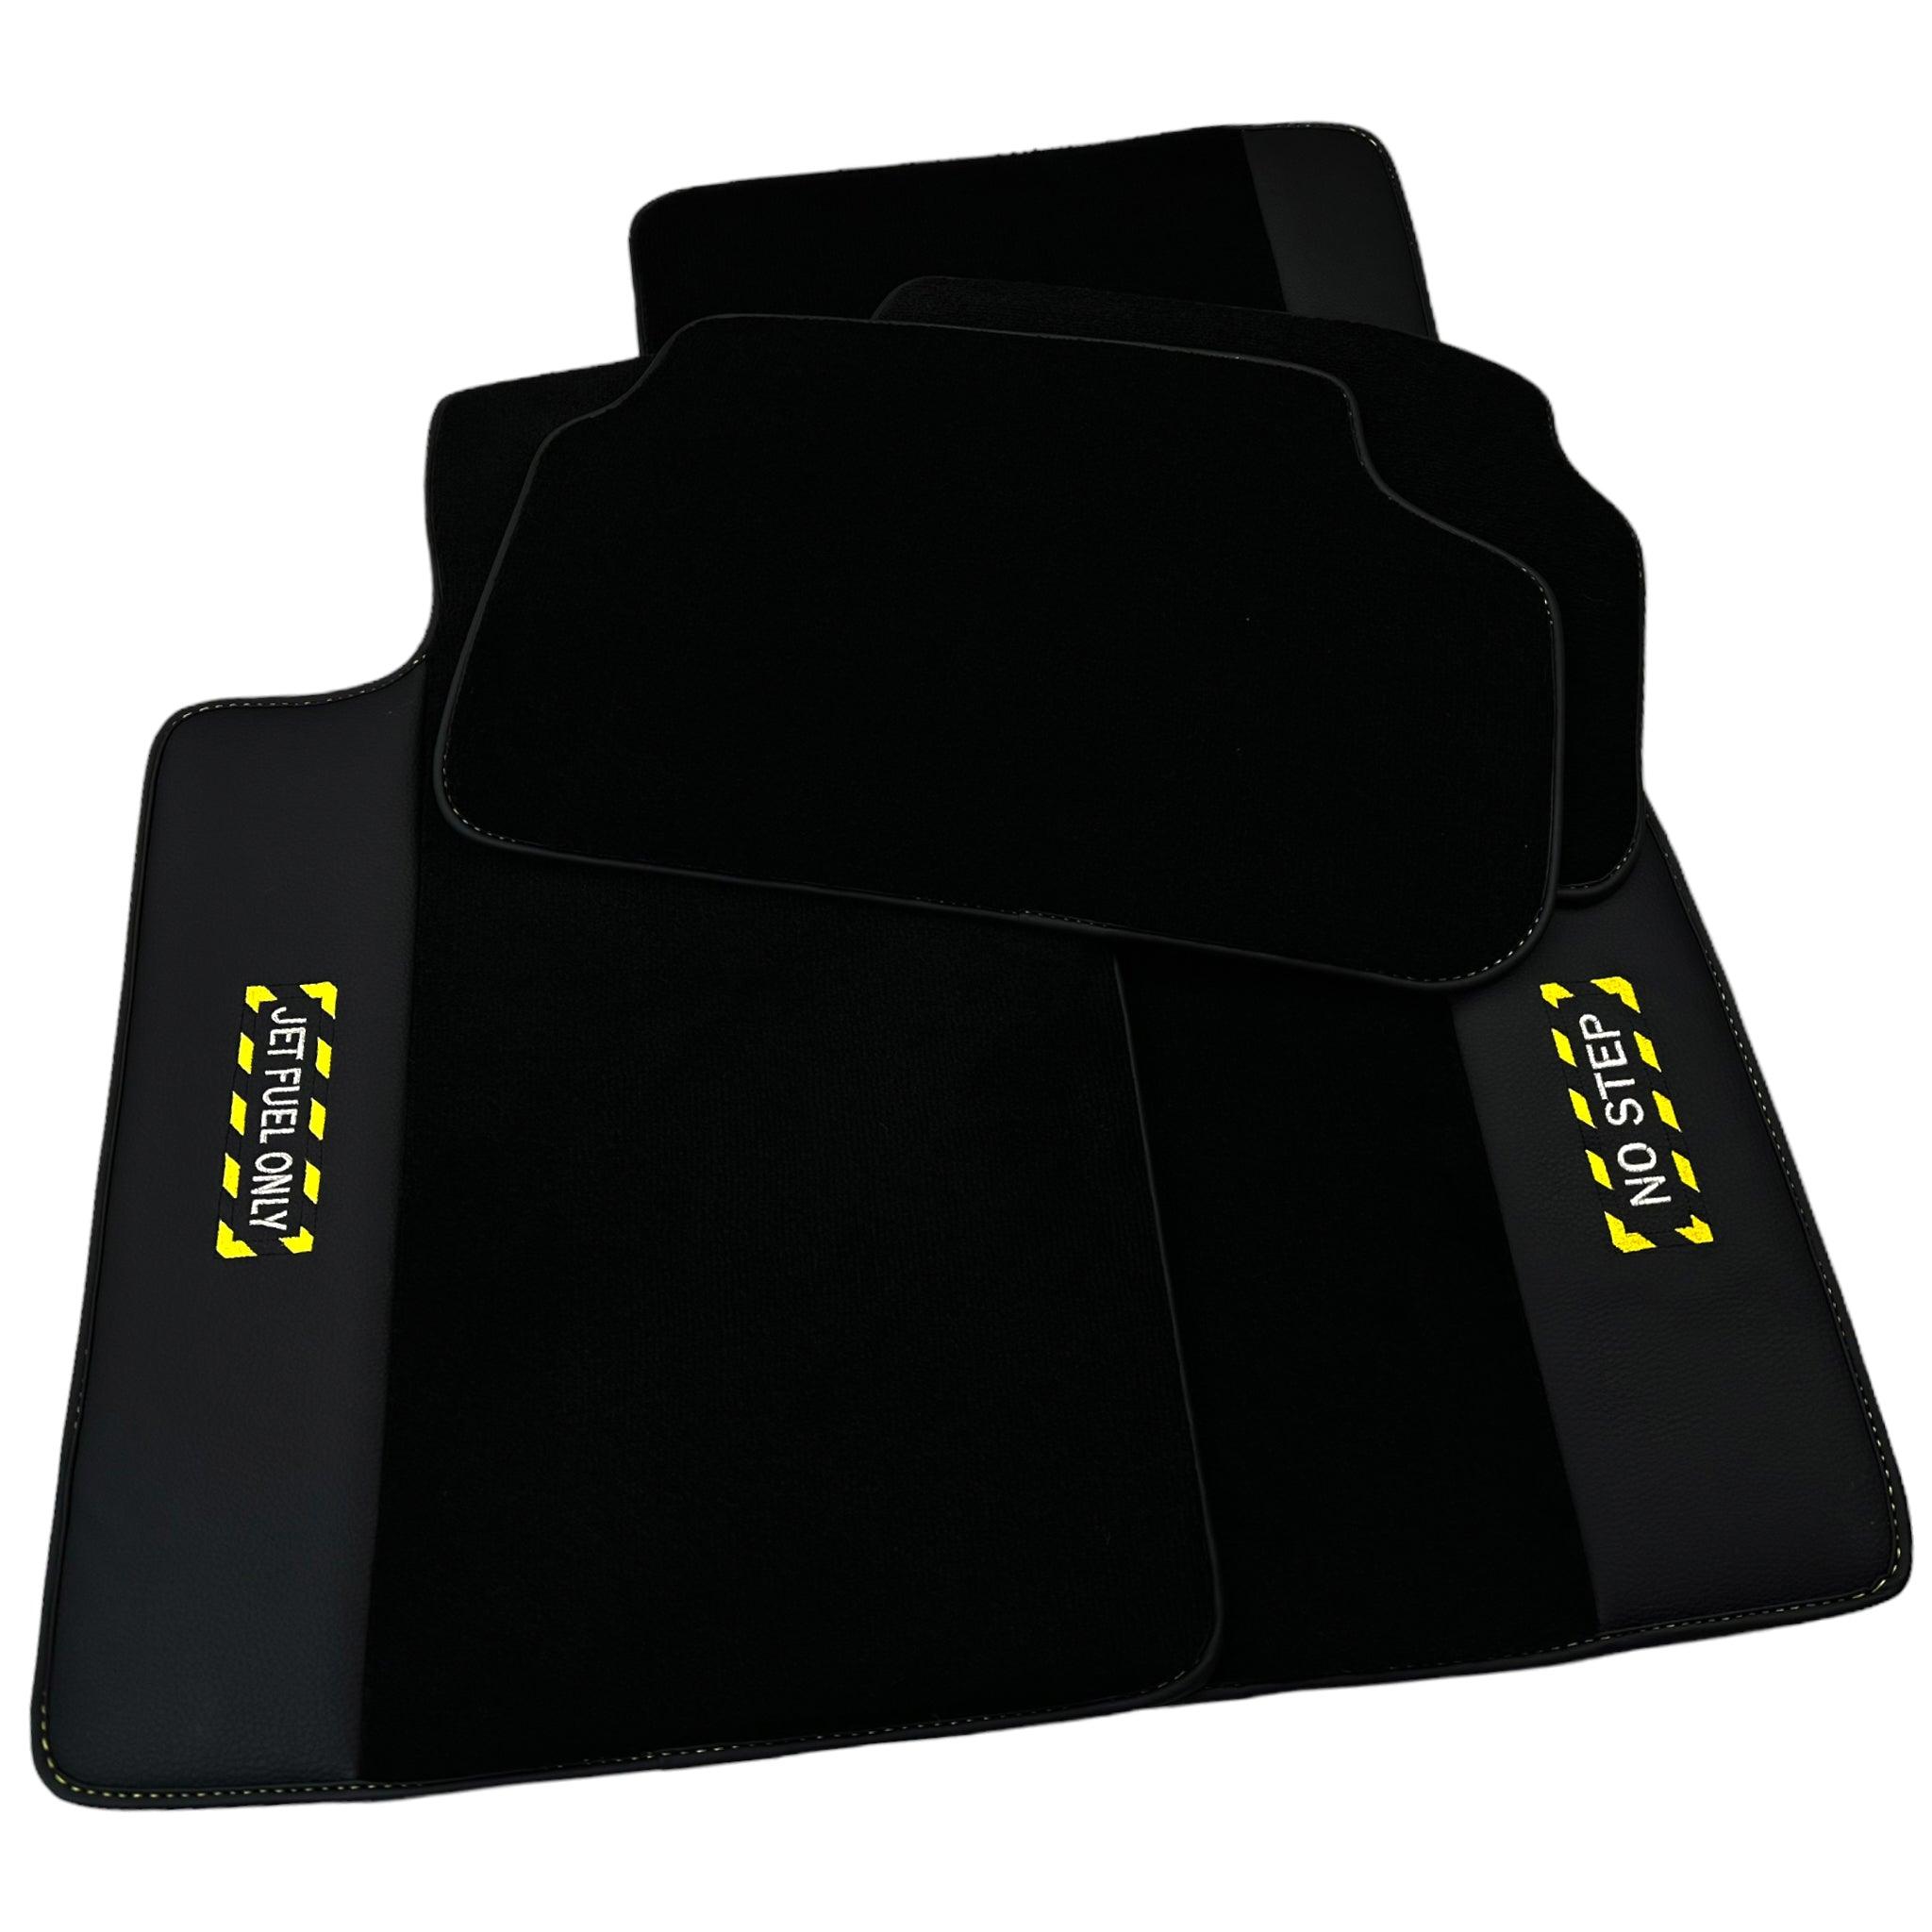 Black Floor Mats with Leather for BMW 5 Series G30 - "Jet Fuel Only"